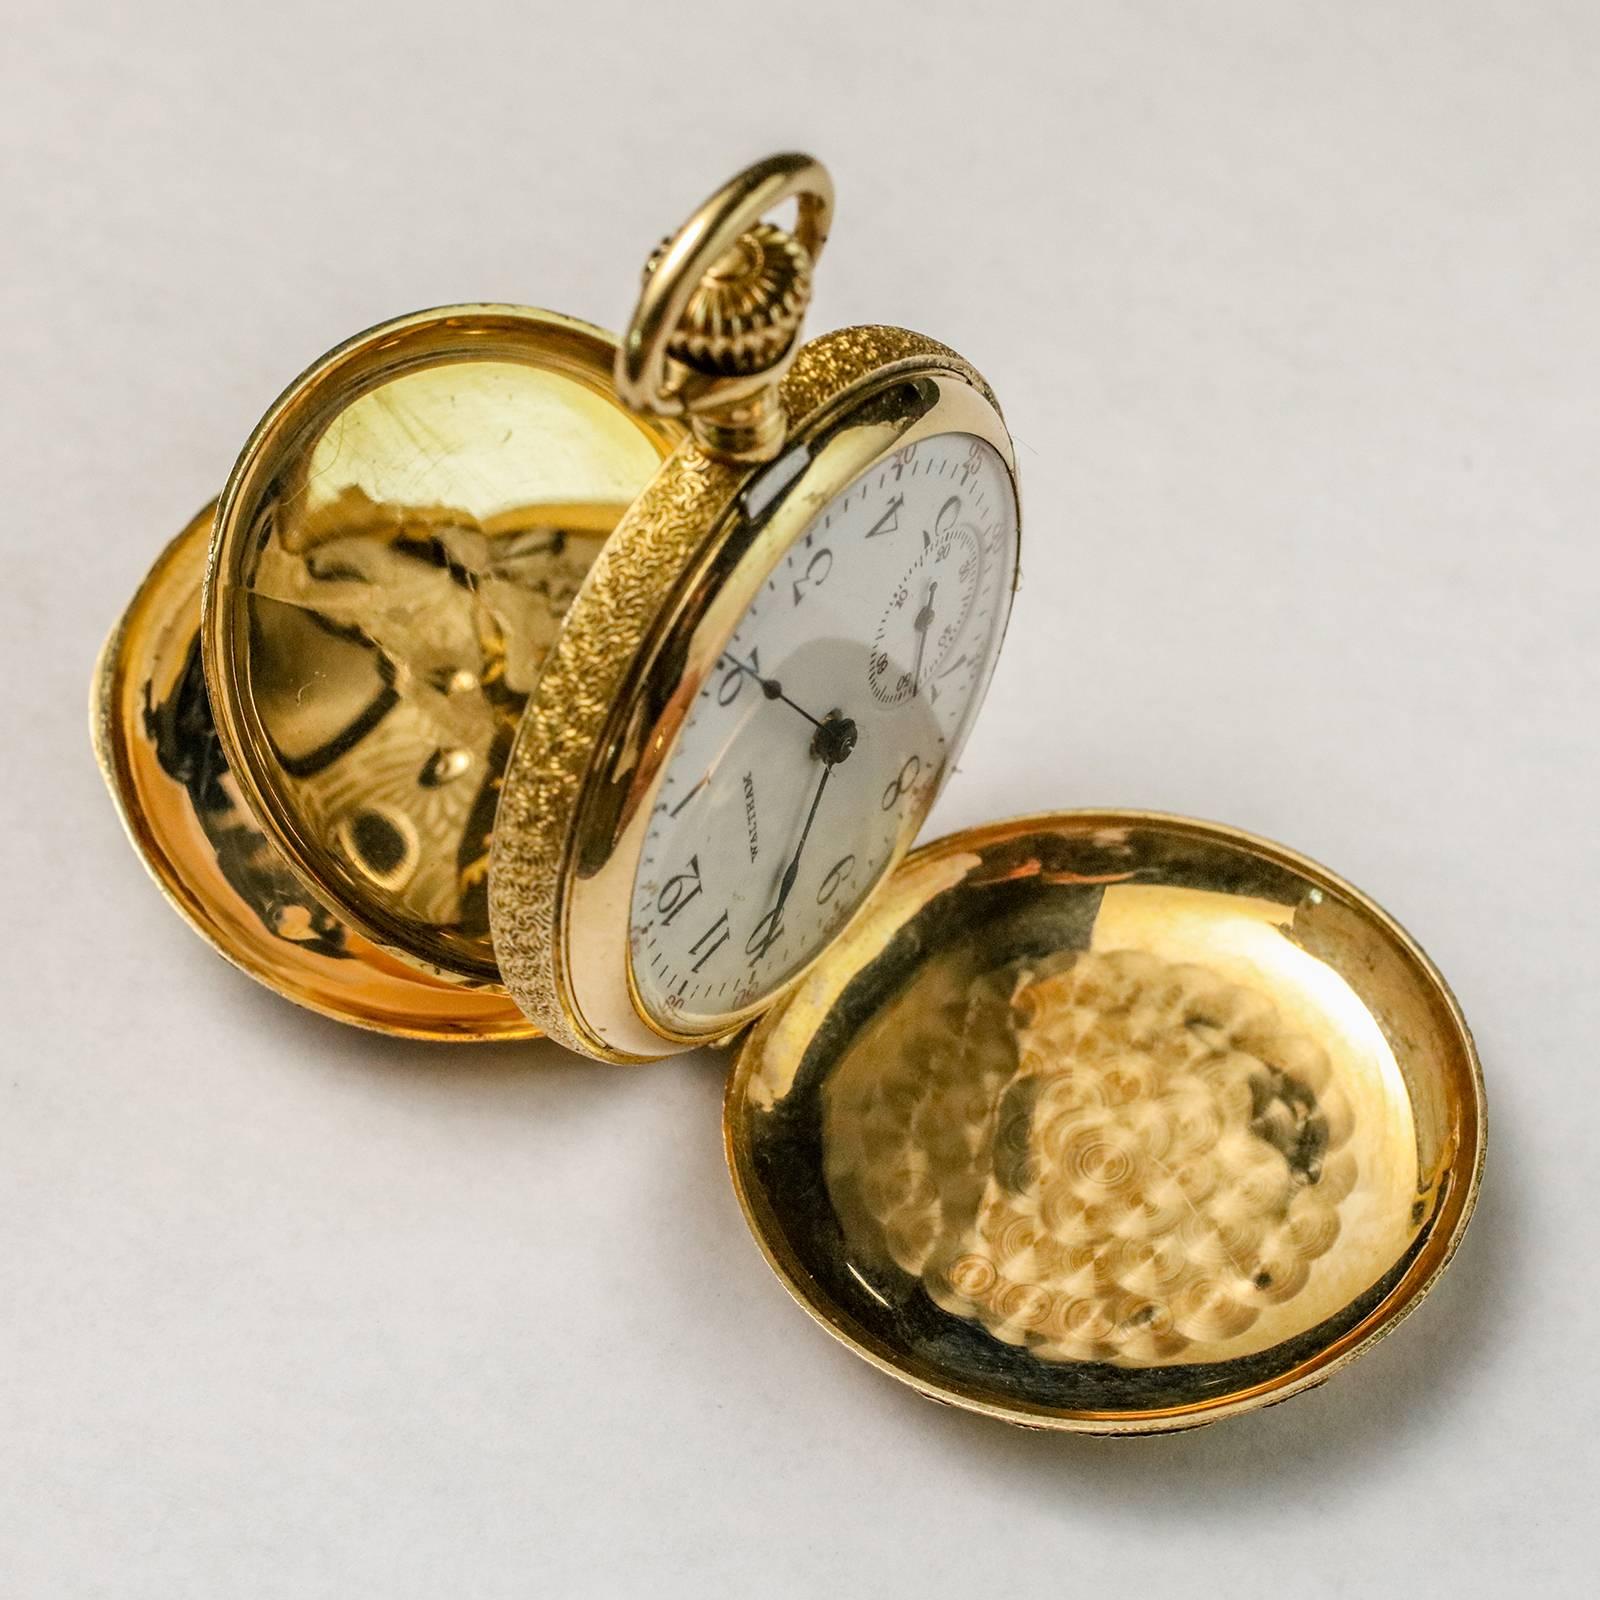 Small 14k gold multi-colored pocket watch by WALTHAM. Case heavily detailed with multi-colored gold overlay, including an intricately executed basket of flowers on the back side and an engraved medallion on the front.  Watch features clean numerals